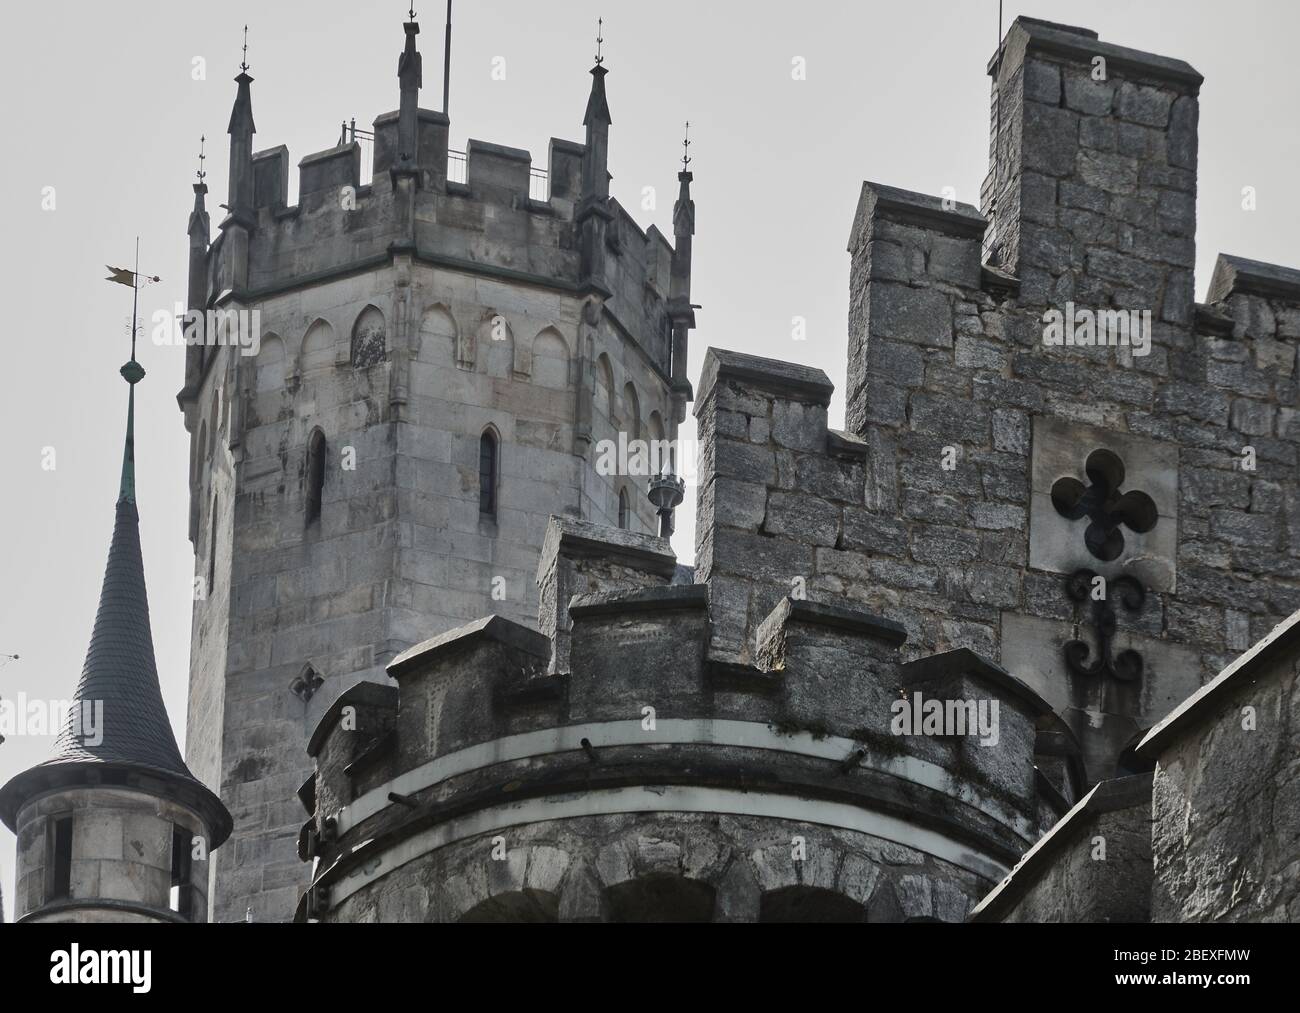 Nordstemmen, Germany, April 15, 2020: Close-up of the central fortified tower of Marienburg Castle Stock Photo